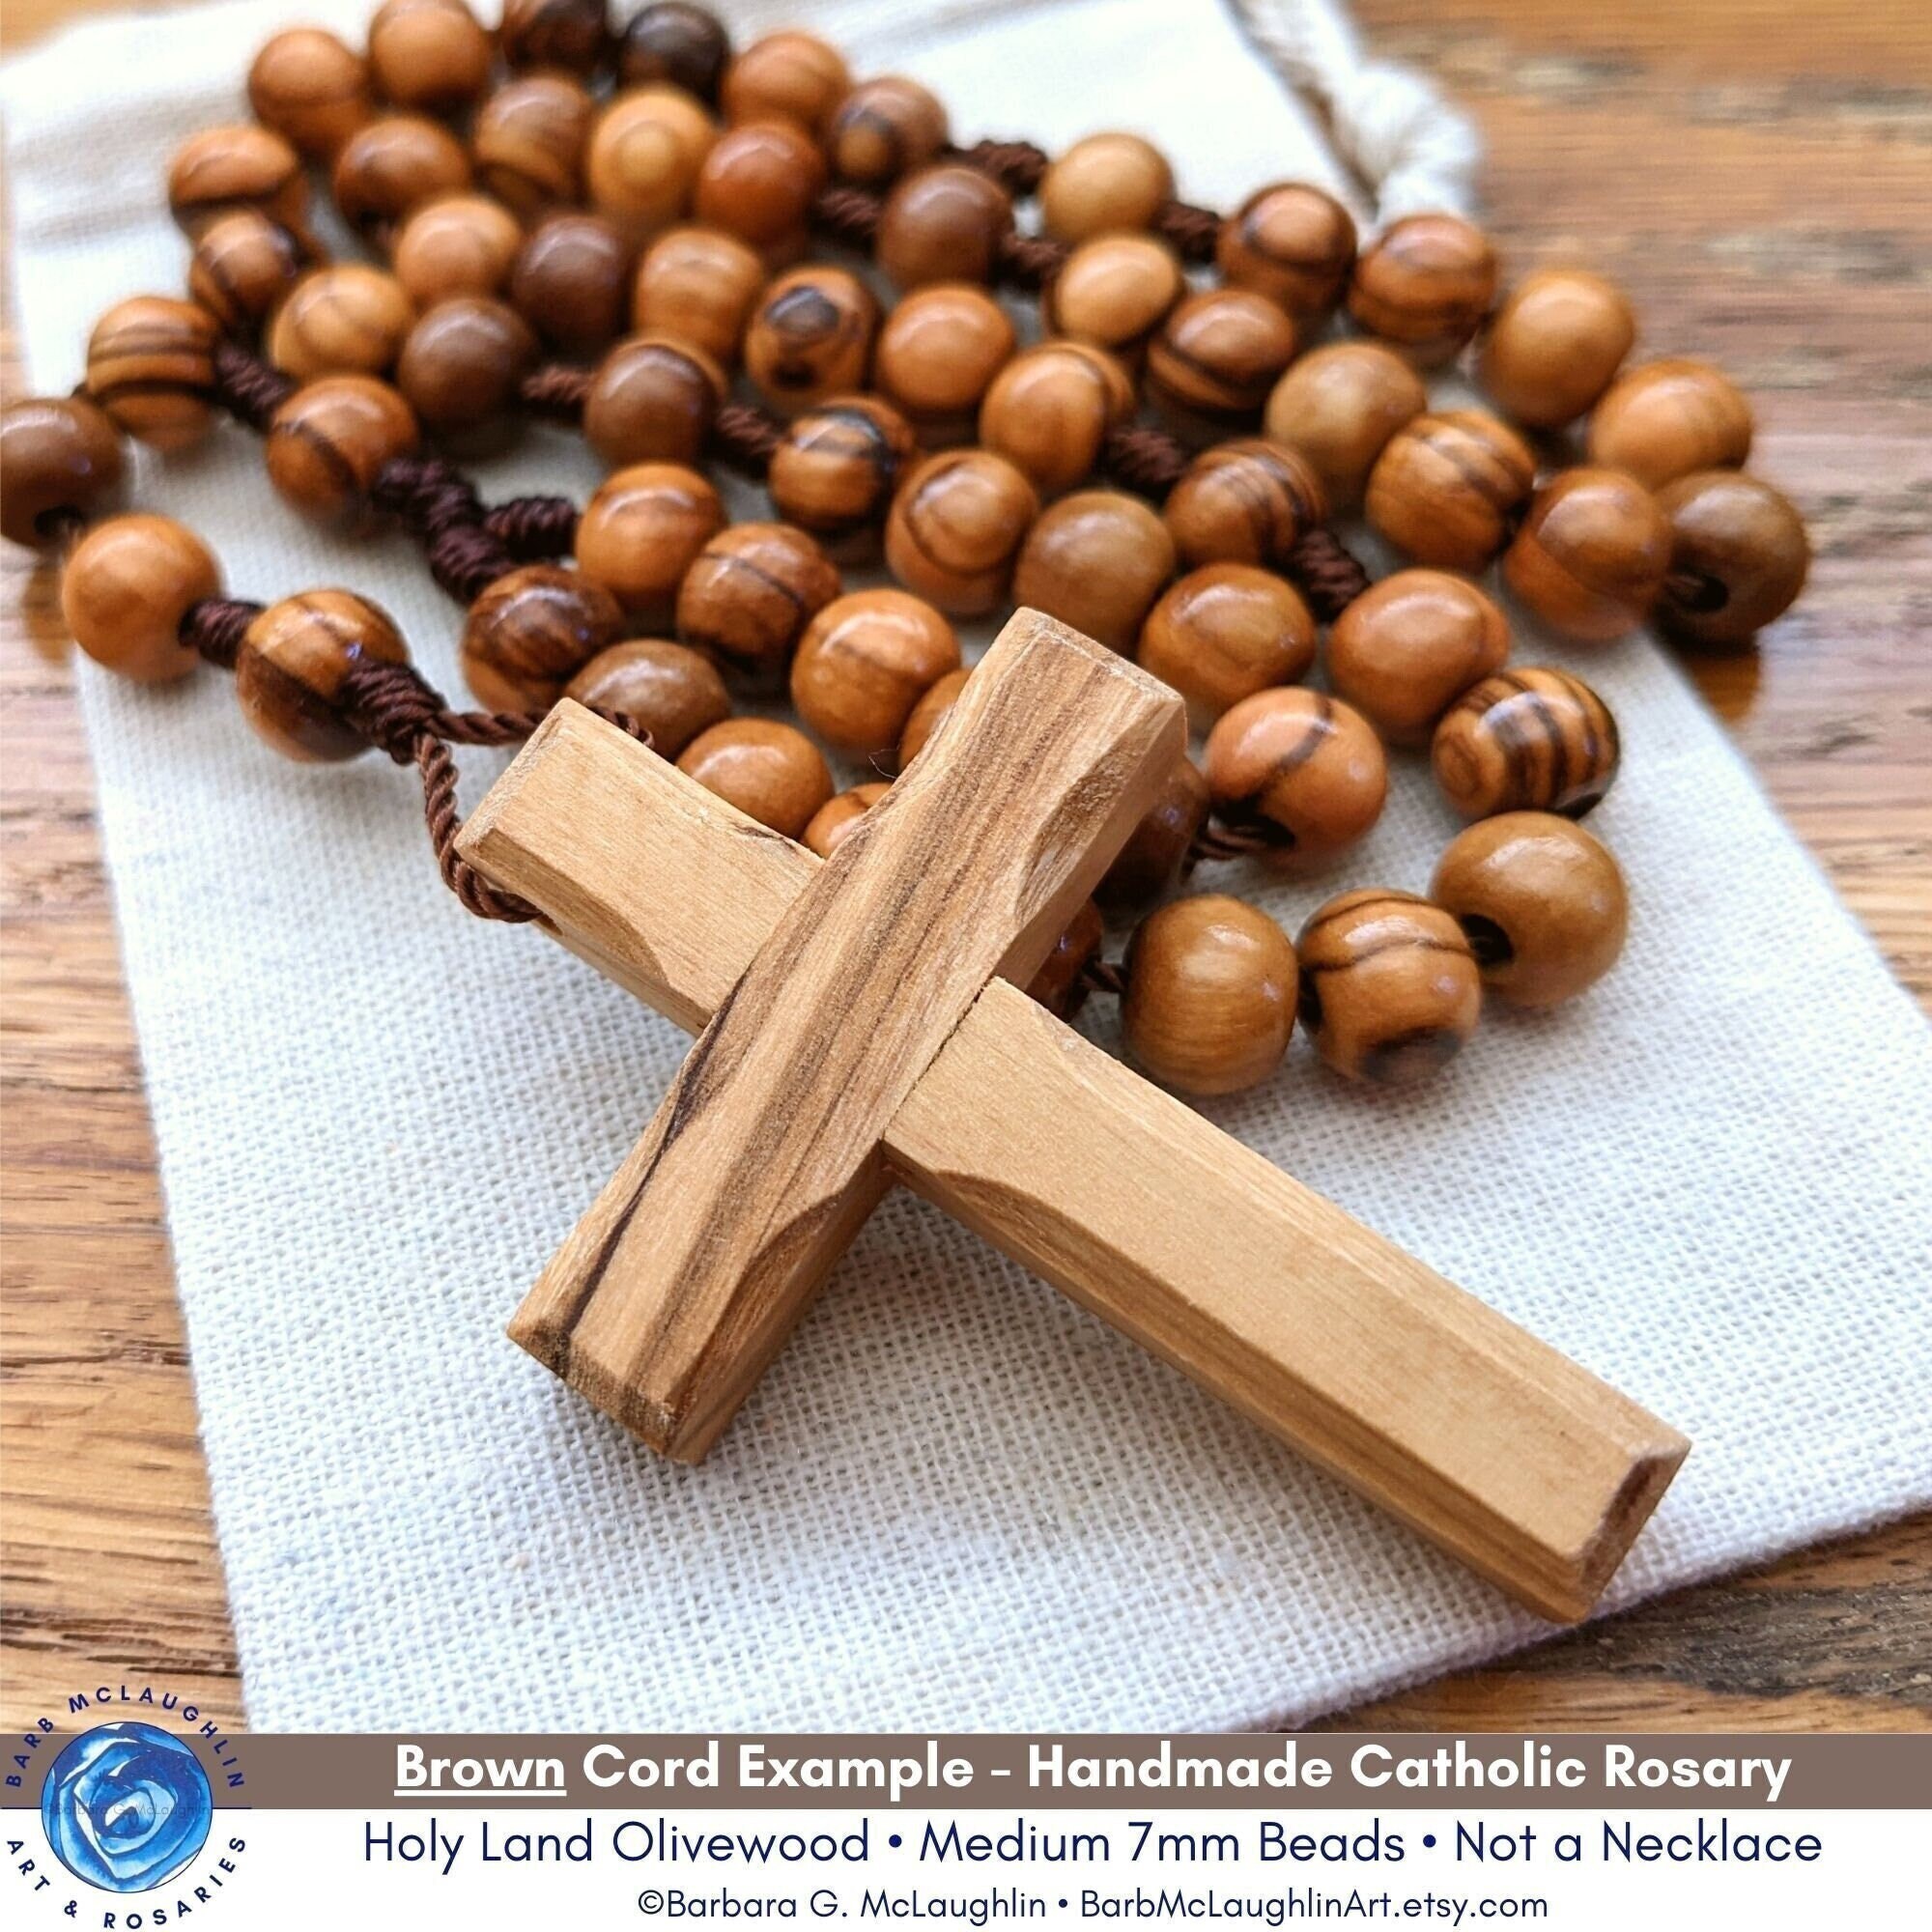 Handmade Catholic Rosary With 7mm Olive Wood Rosary Beads, Wooden